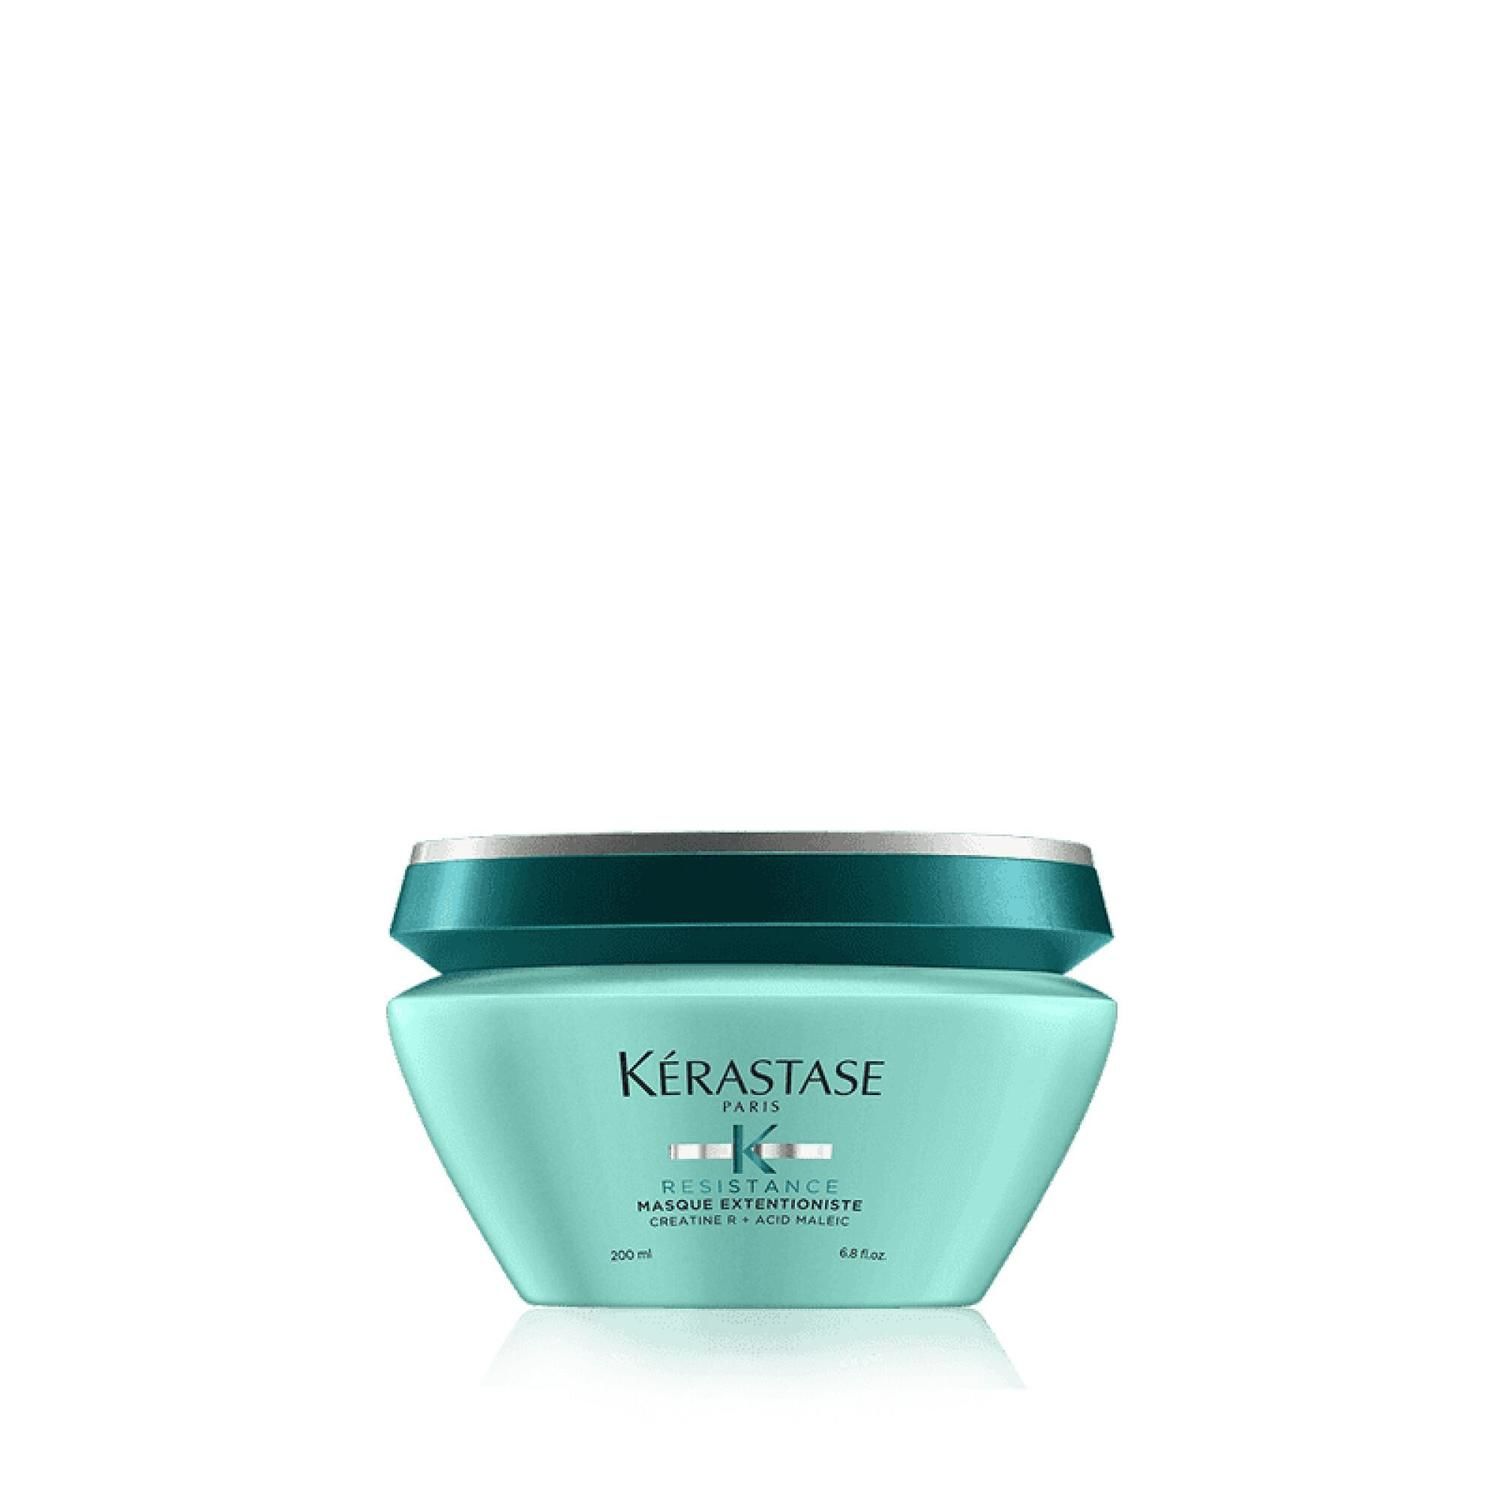 Masque Extentioniste 200ml n/a 